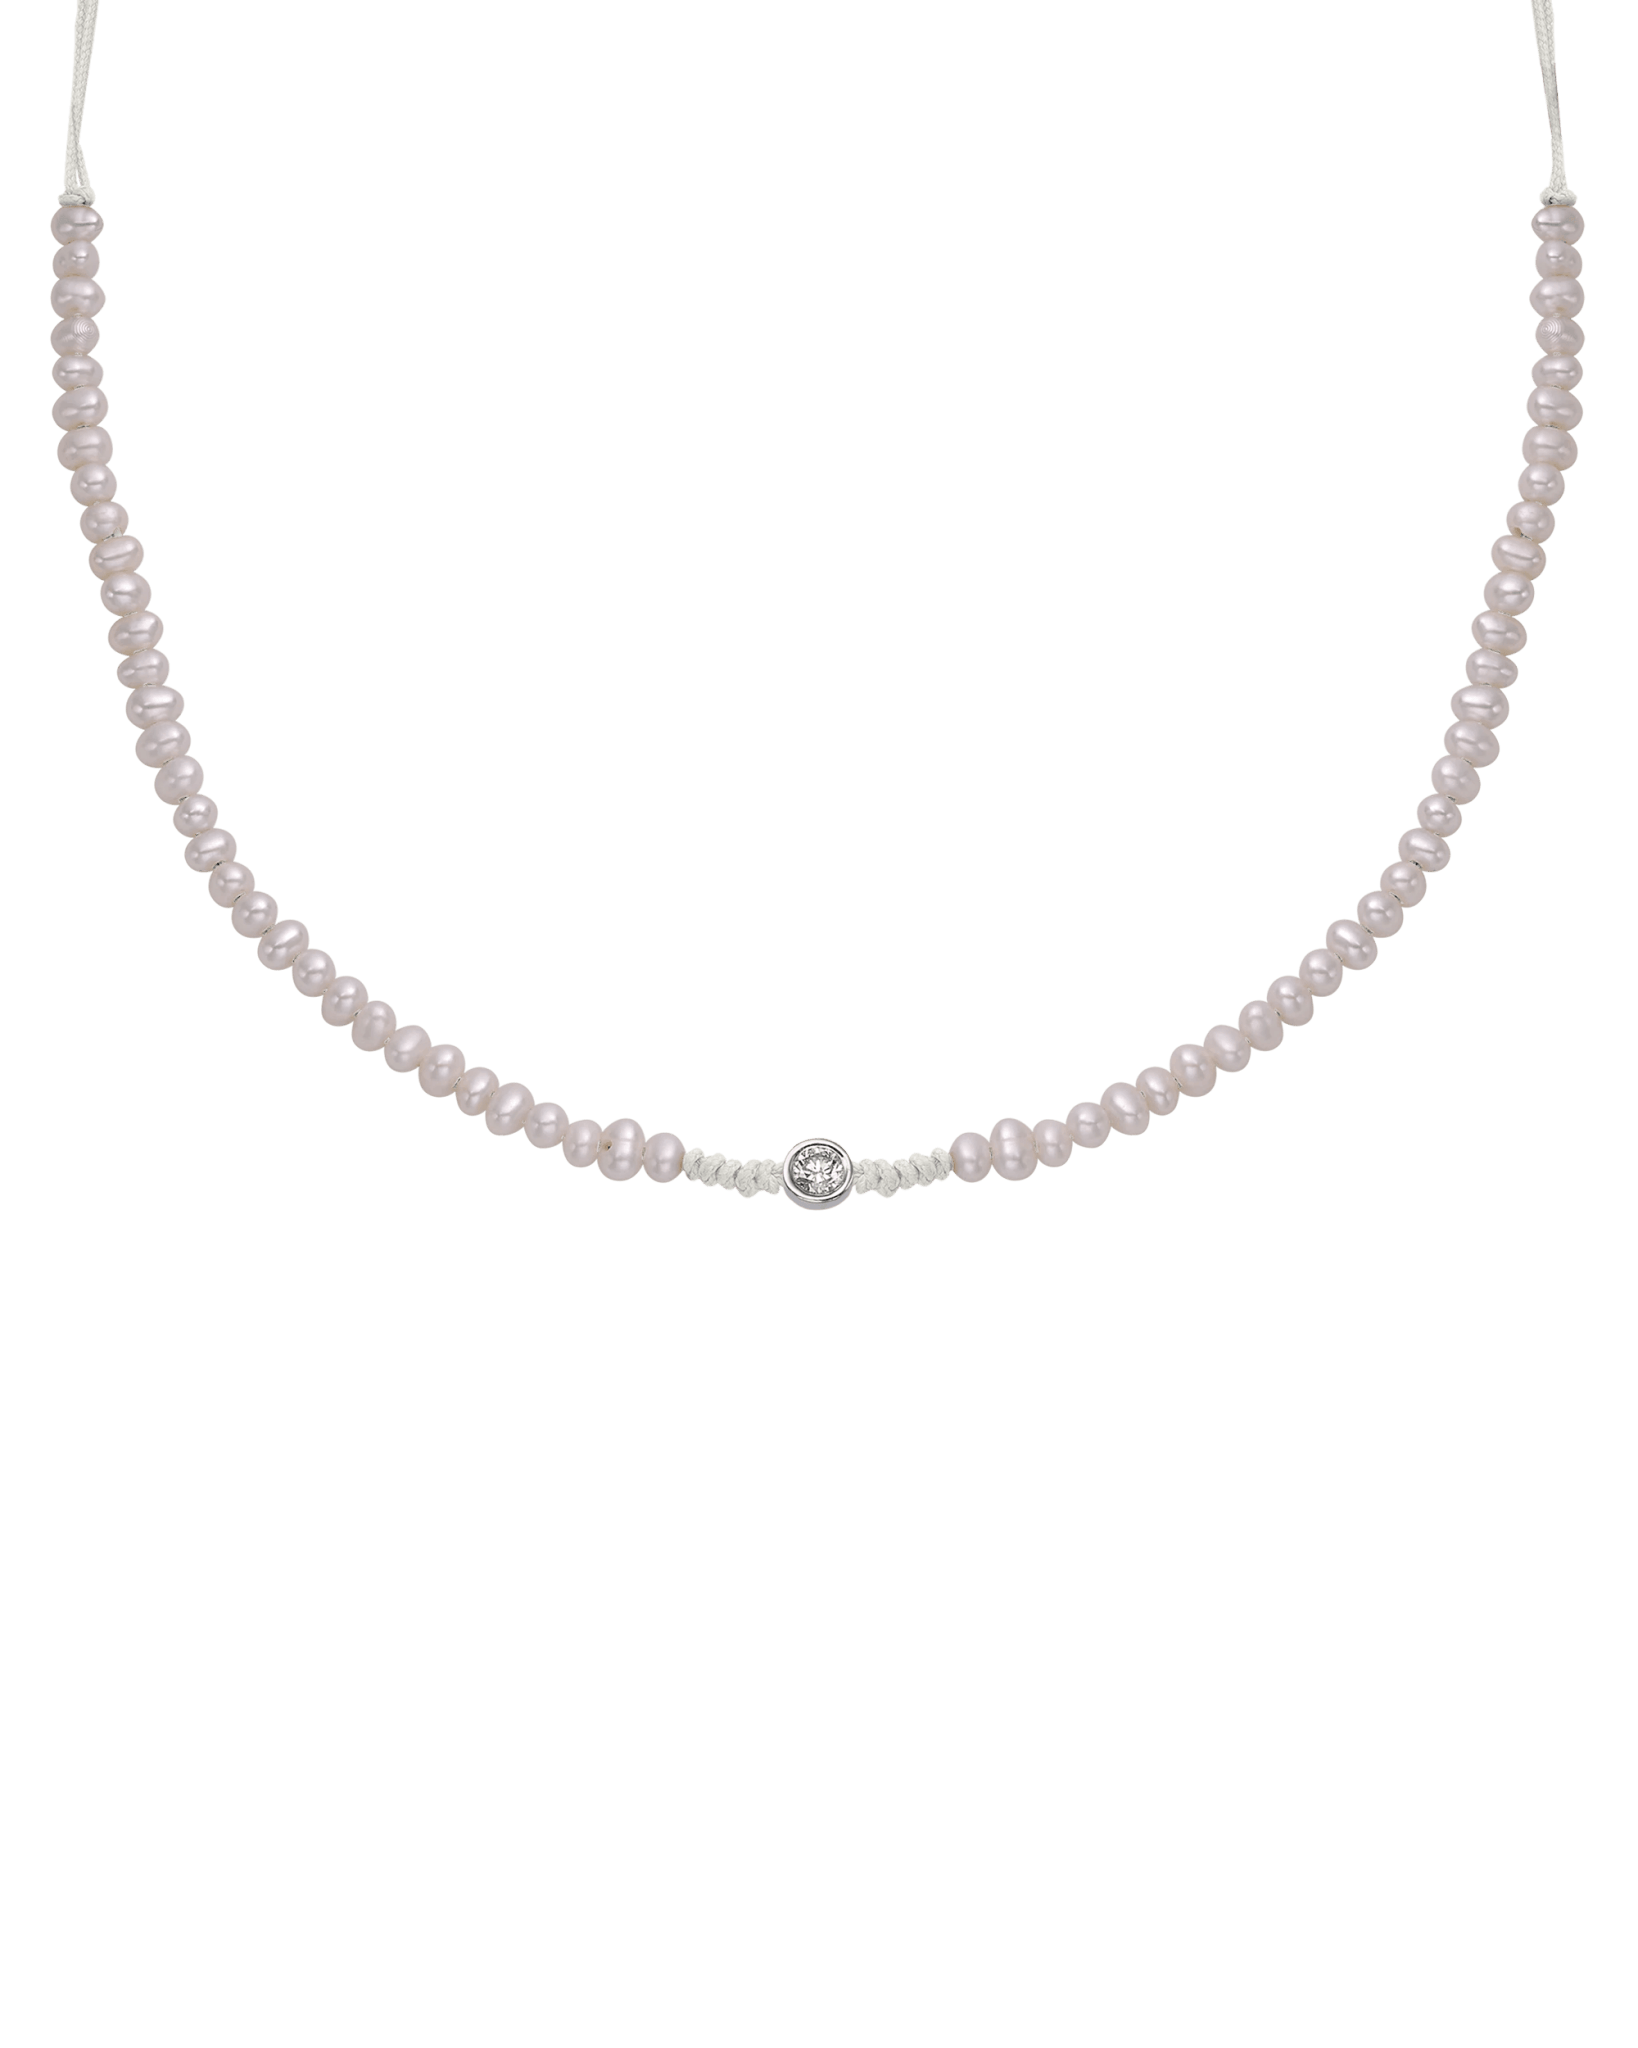 Natural Pearl String of Love Necklace - 14K White Gold Necklaces 14K Solid Gold Pearl Large: 0.1ct 